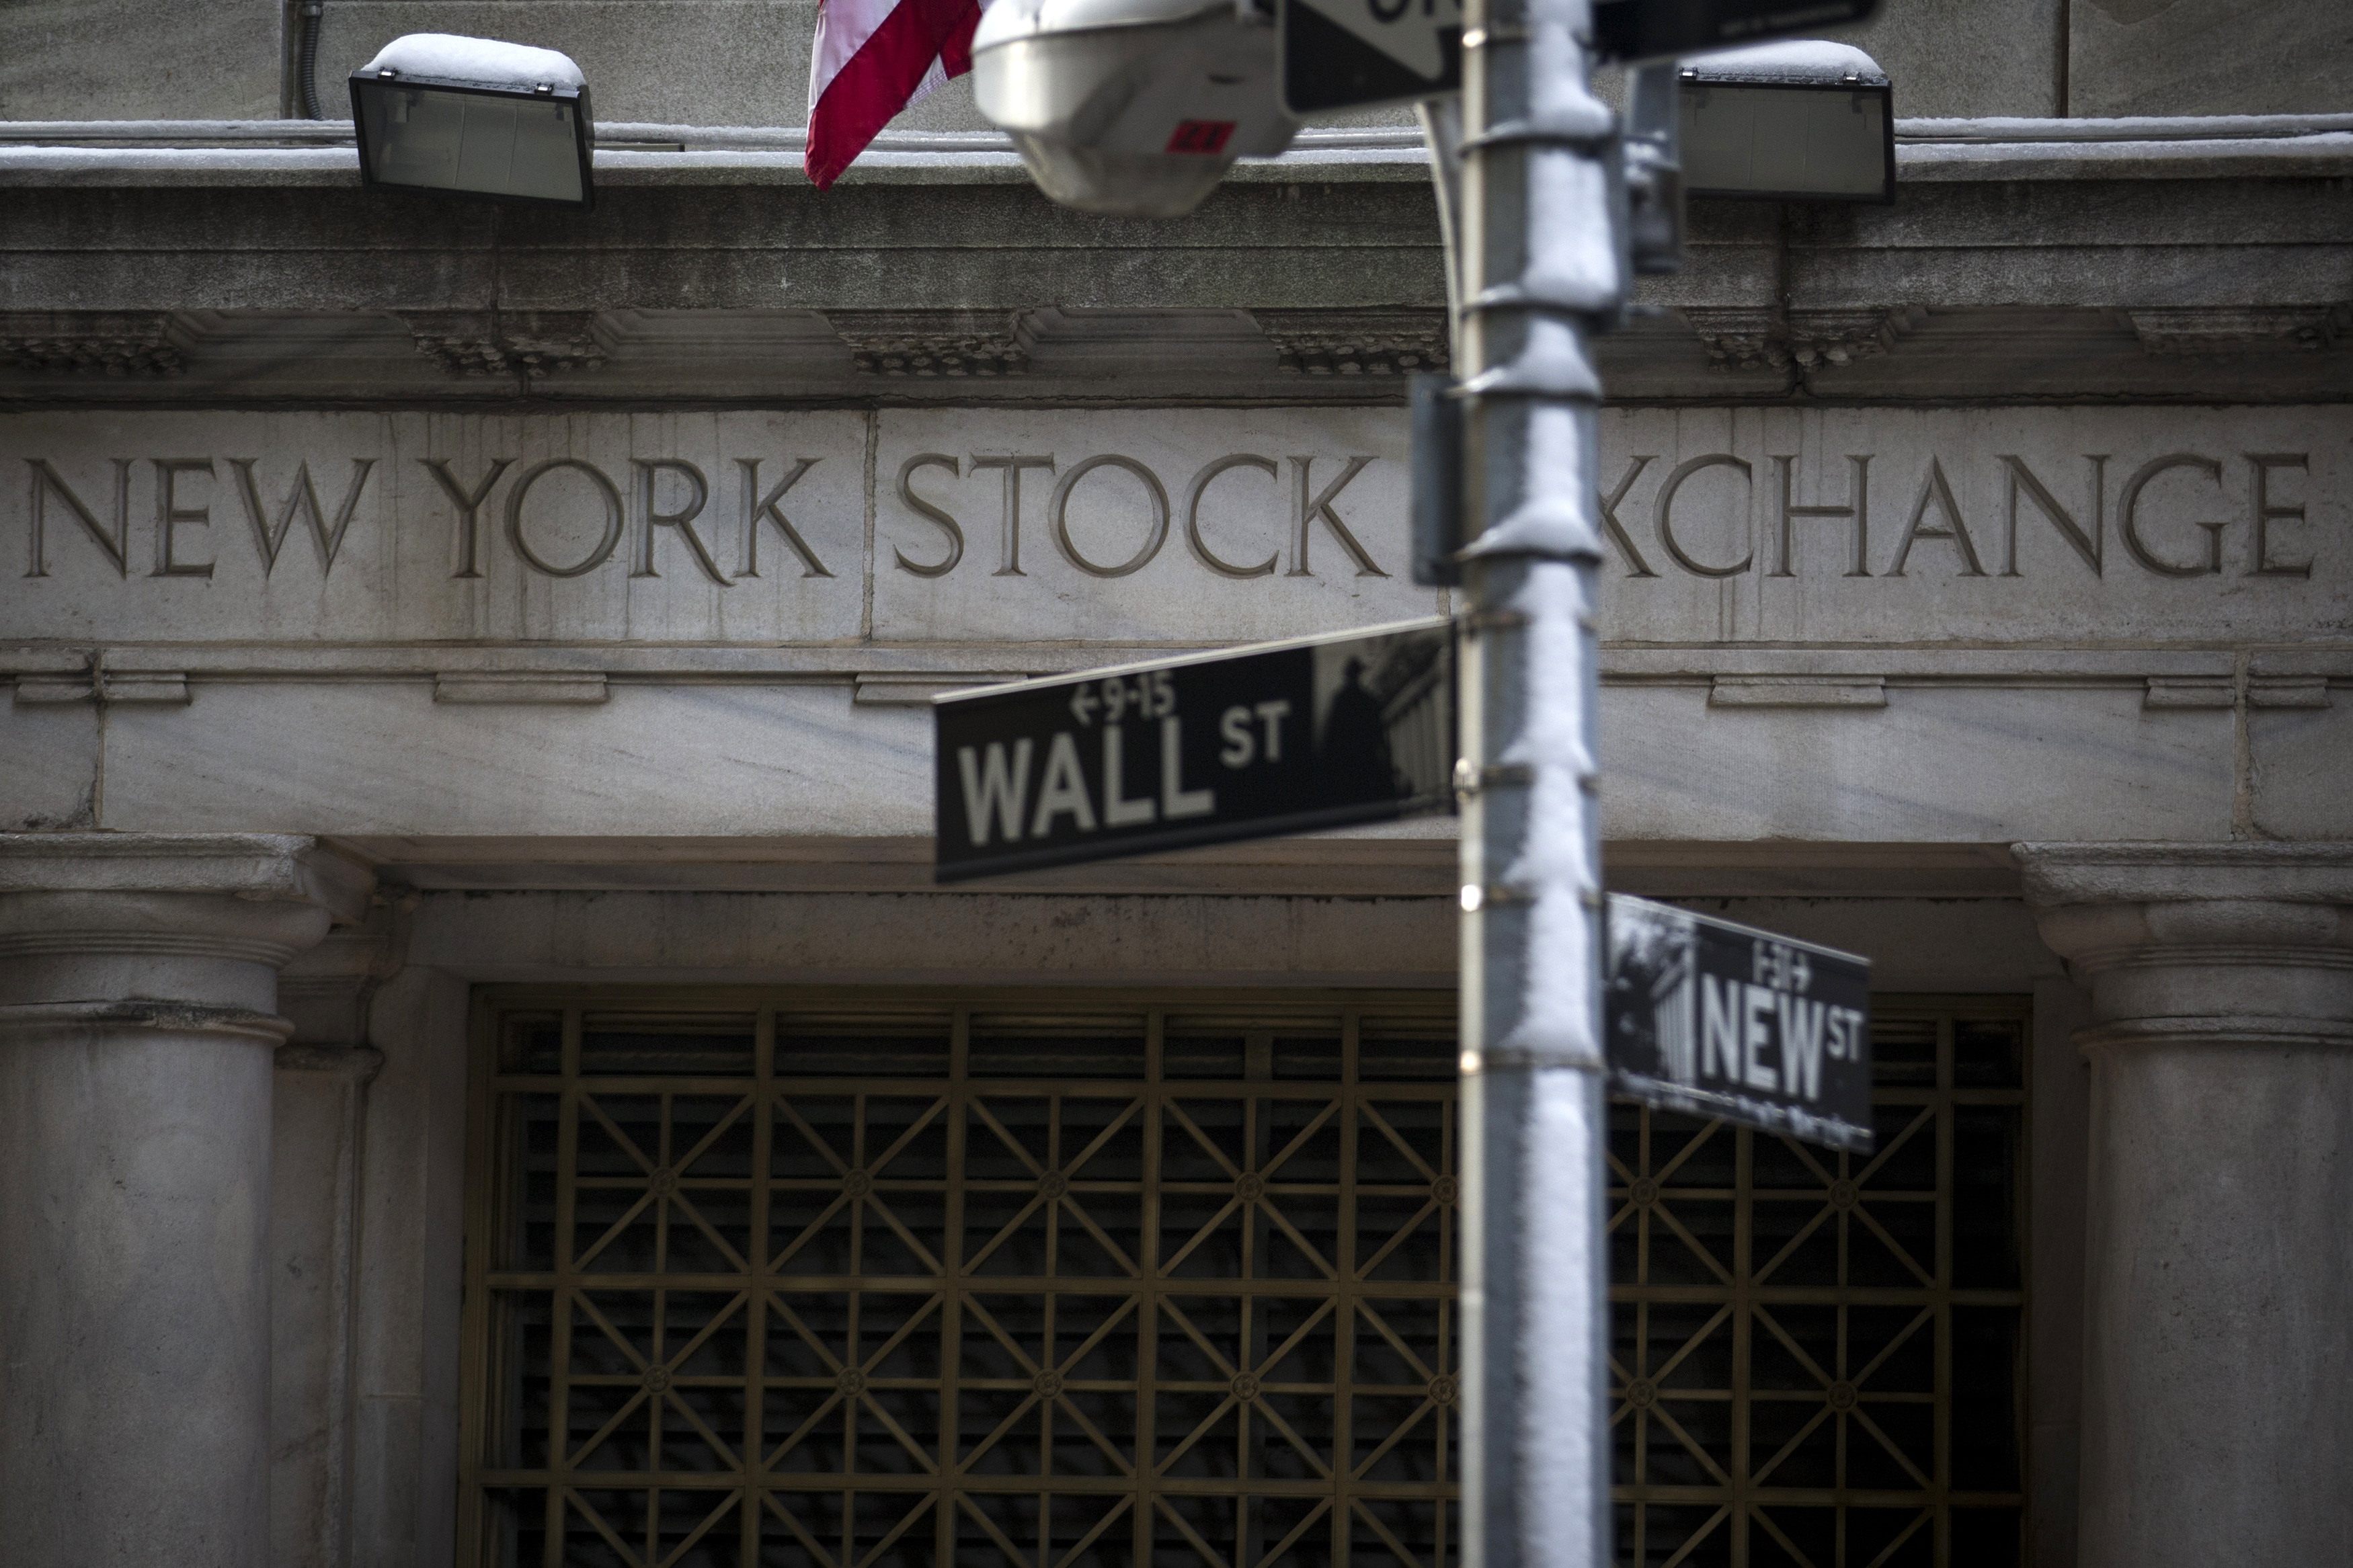 The Wall St. sign is seen outside the door to the New York Stock Exchange in New York's financial district